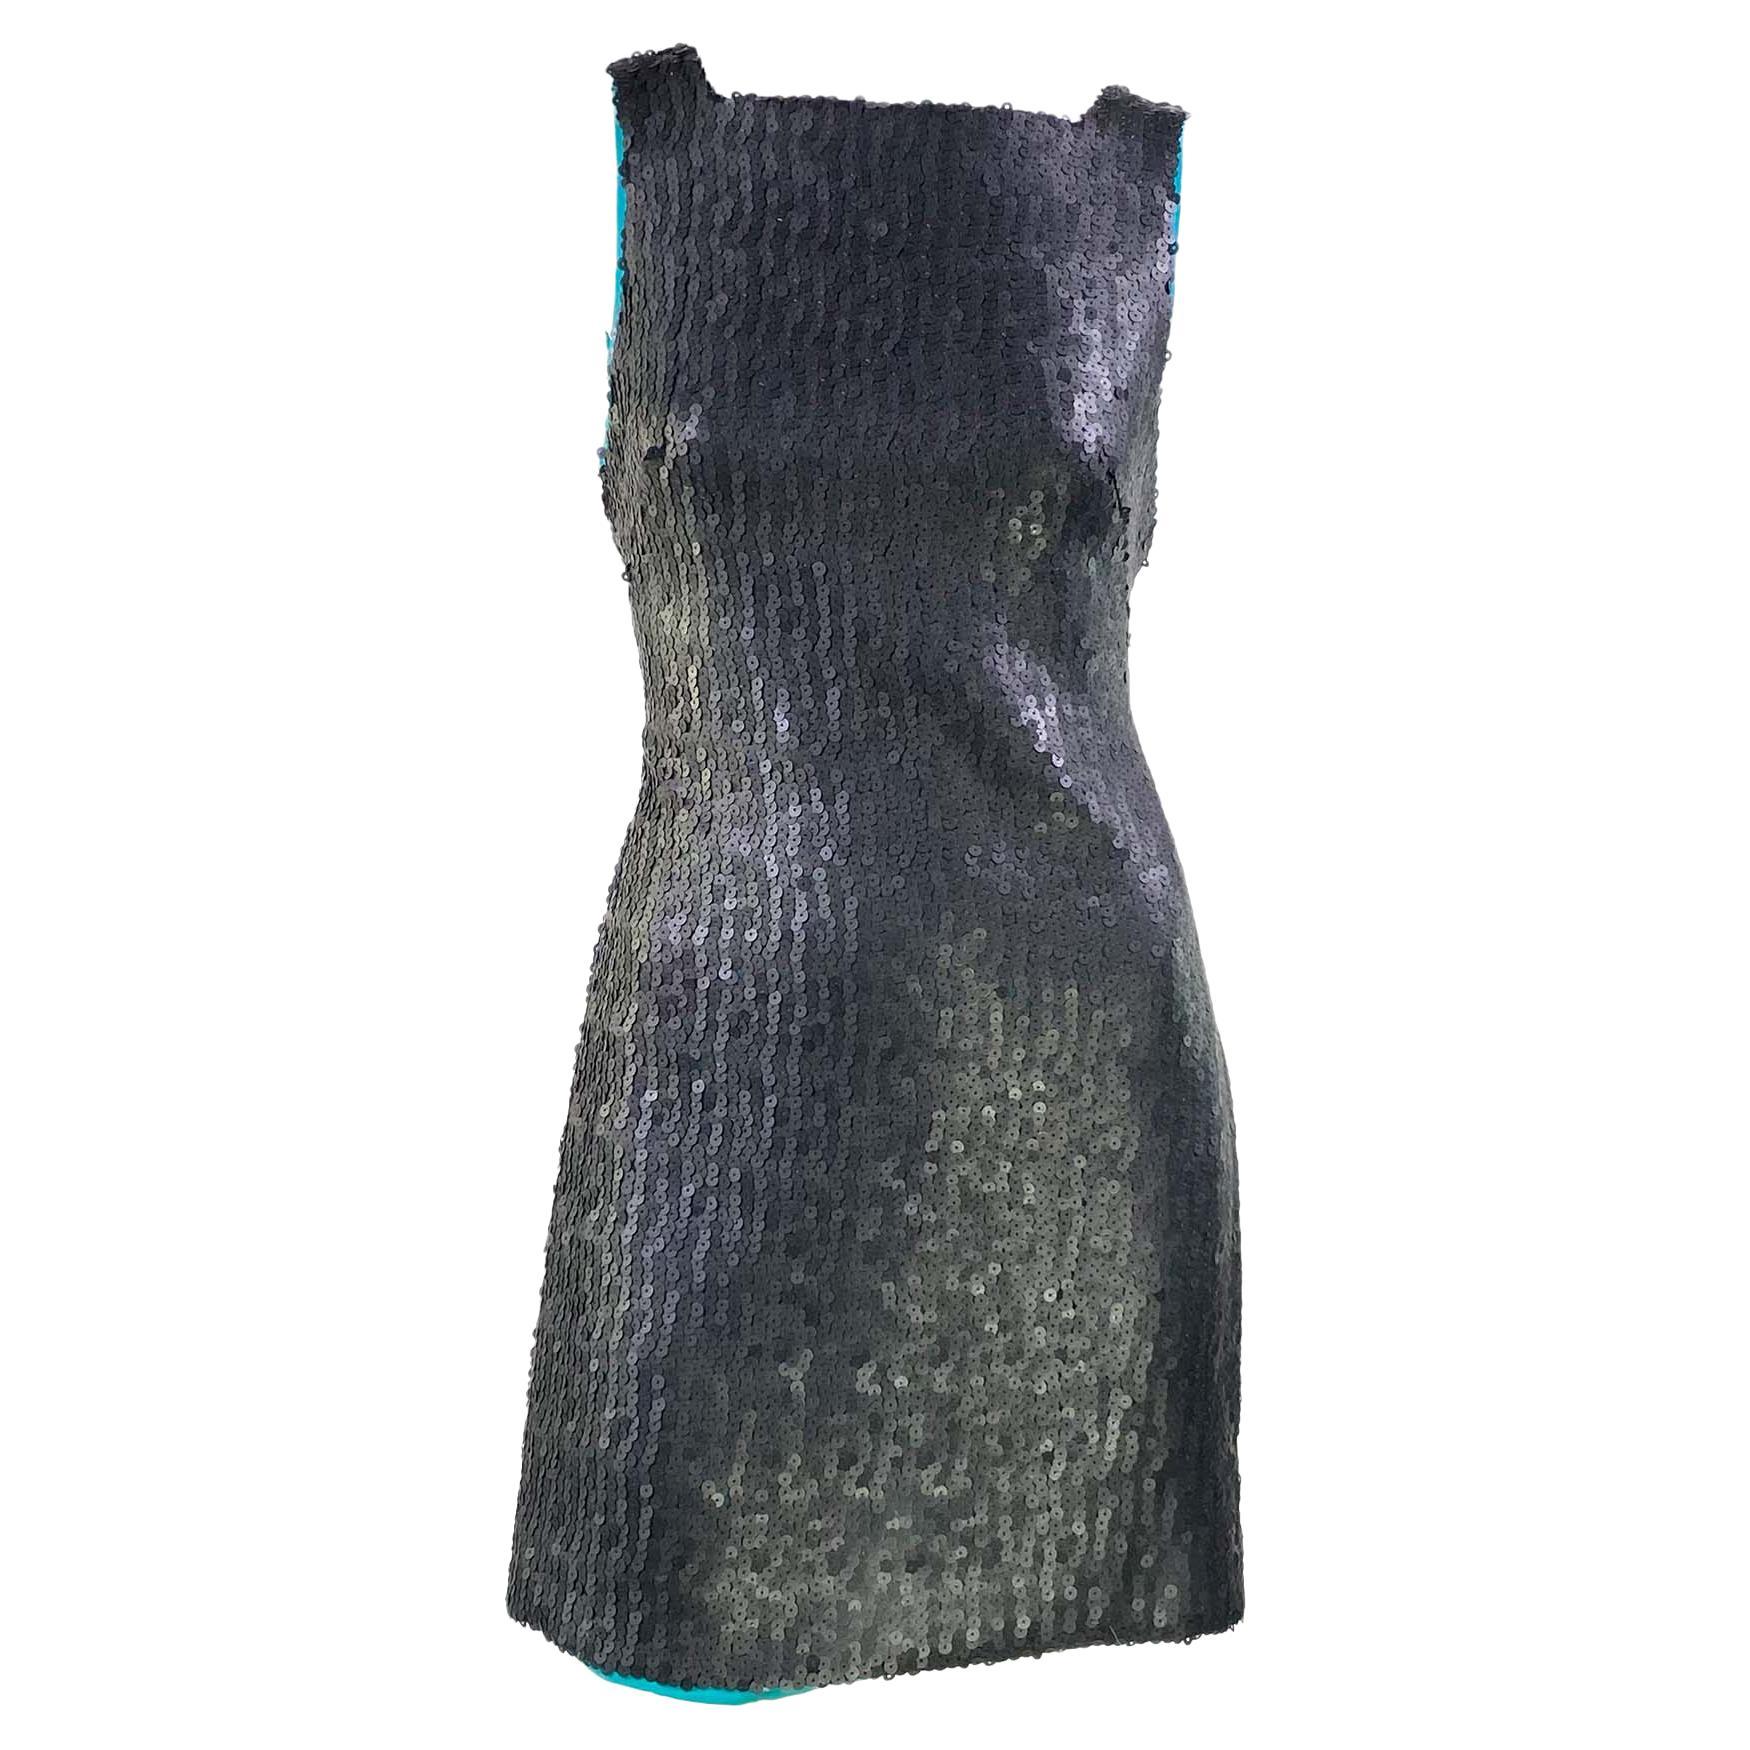 F/W 1999 Gianni Versace by Donatella Matte Sequin Tunic Dress Teal Lining For Sale 1